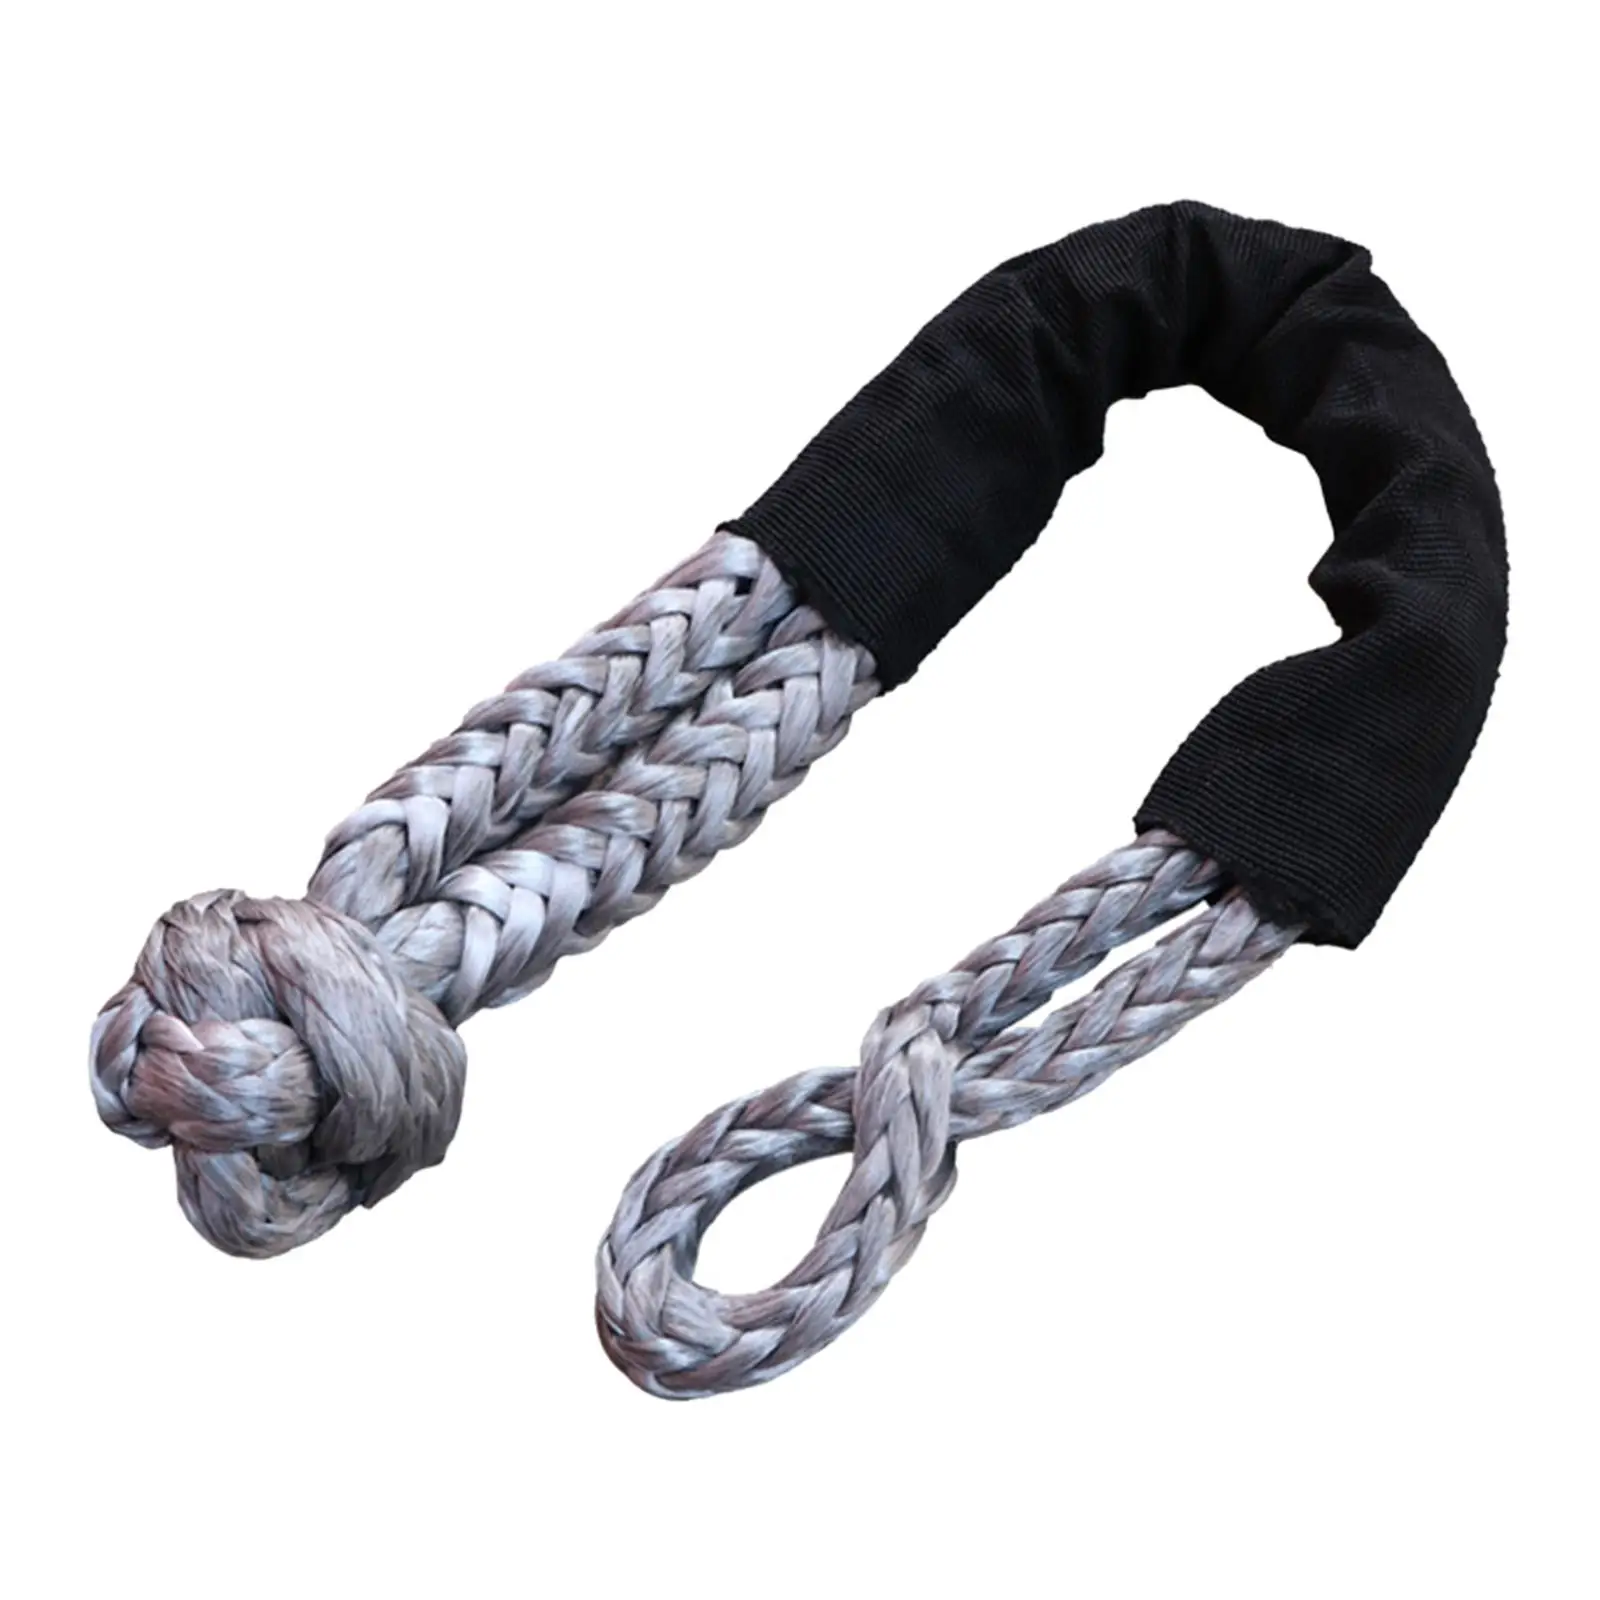 Soft Shackle Car Breakdowns Protective Sleeve High Strength Strong Tow Rope for Winches SUV Vehicles trucks Towing